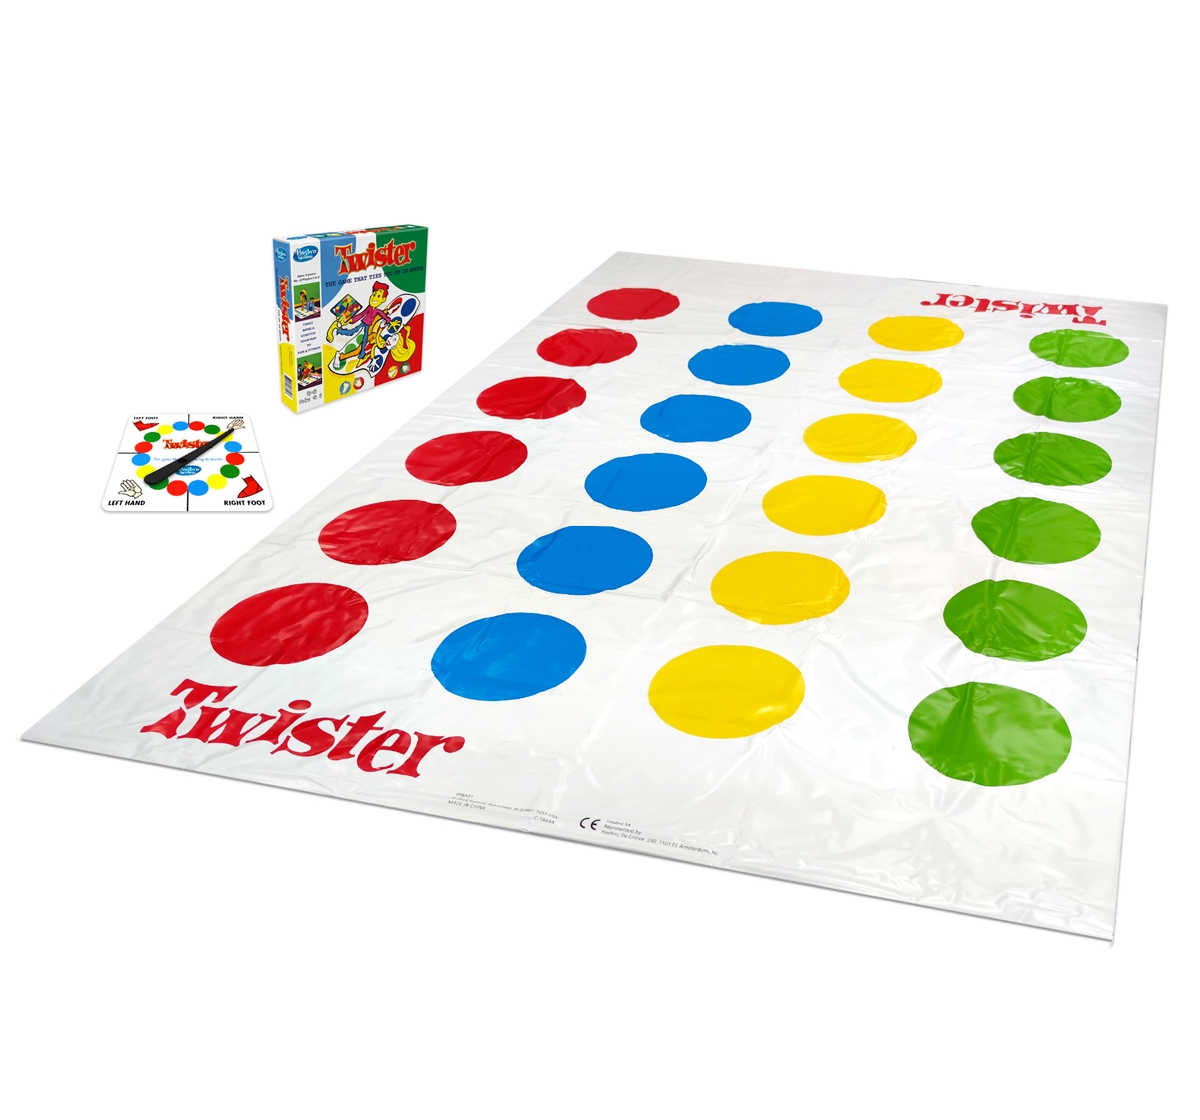 Hasbro Gaming | Hasbro Twister Party Game For Family and Friends for Kids 4Y+, Multicolour